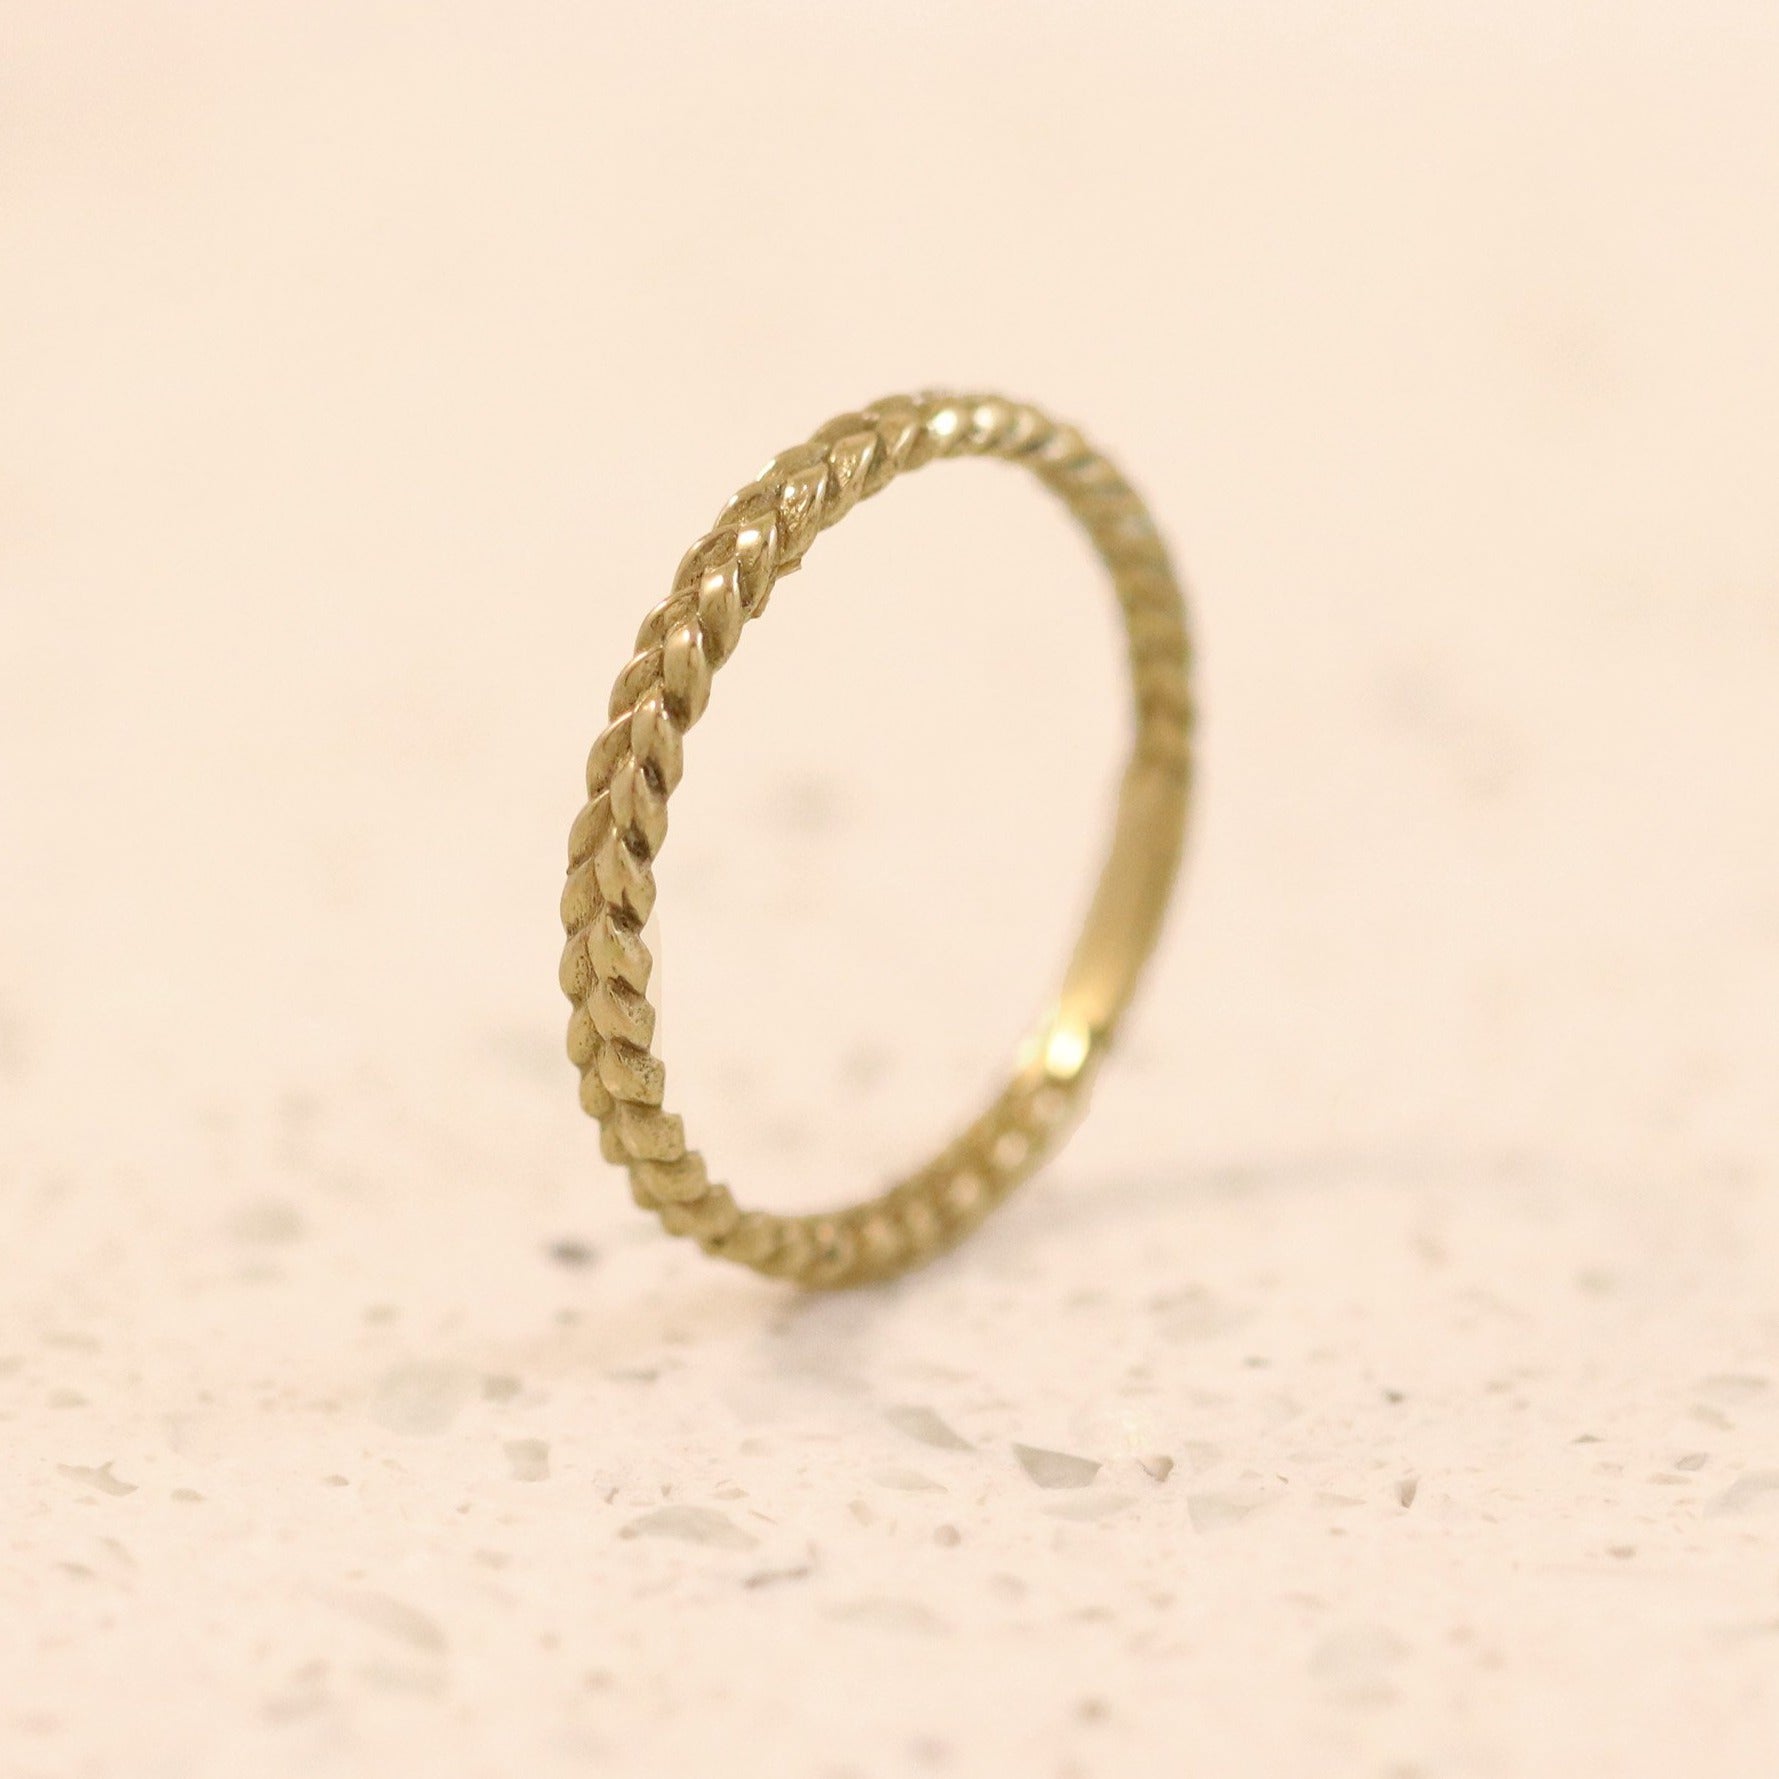 Jasmine Pure Woven Ring in Brass